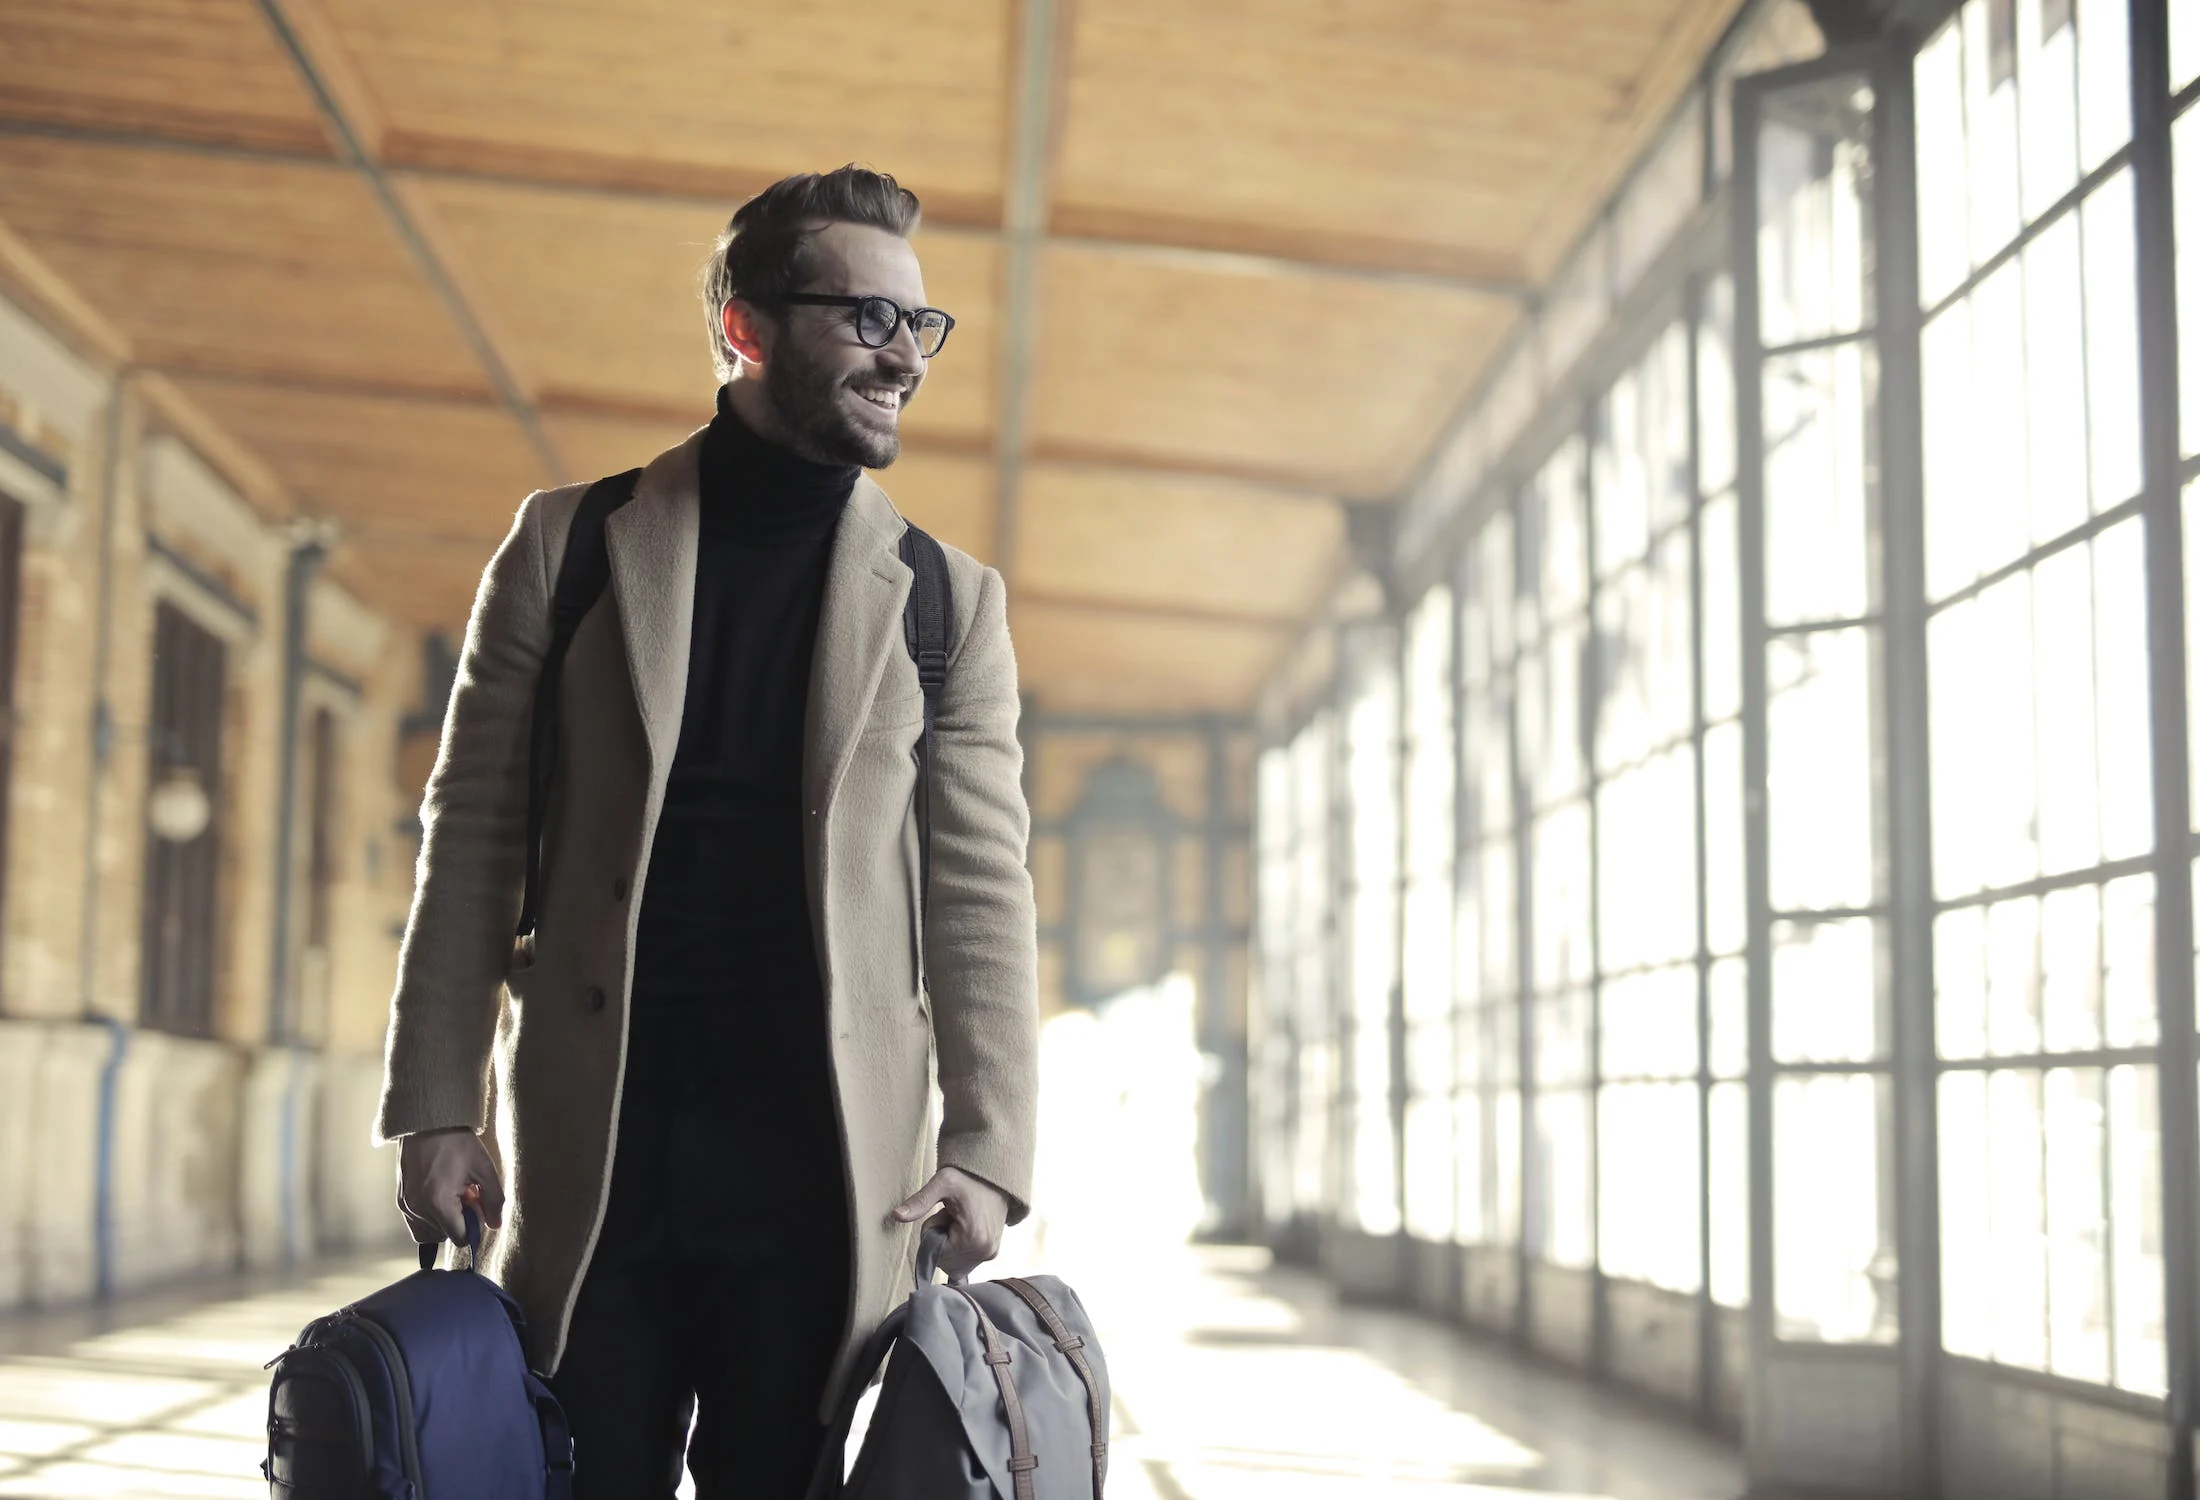 5 Leisure Items to Pack Despite Going on a Business Trip